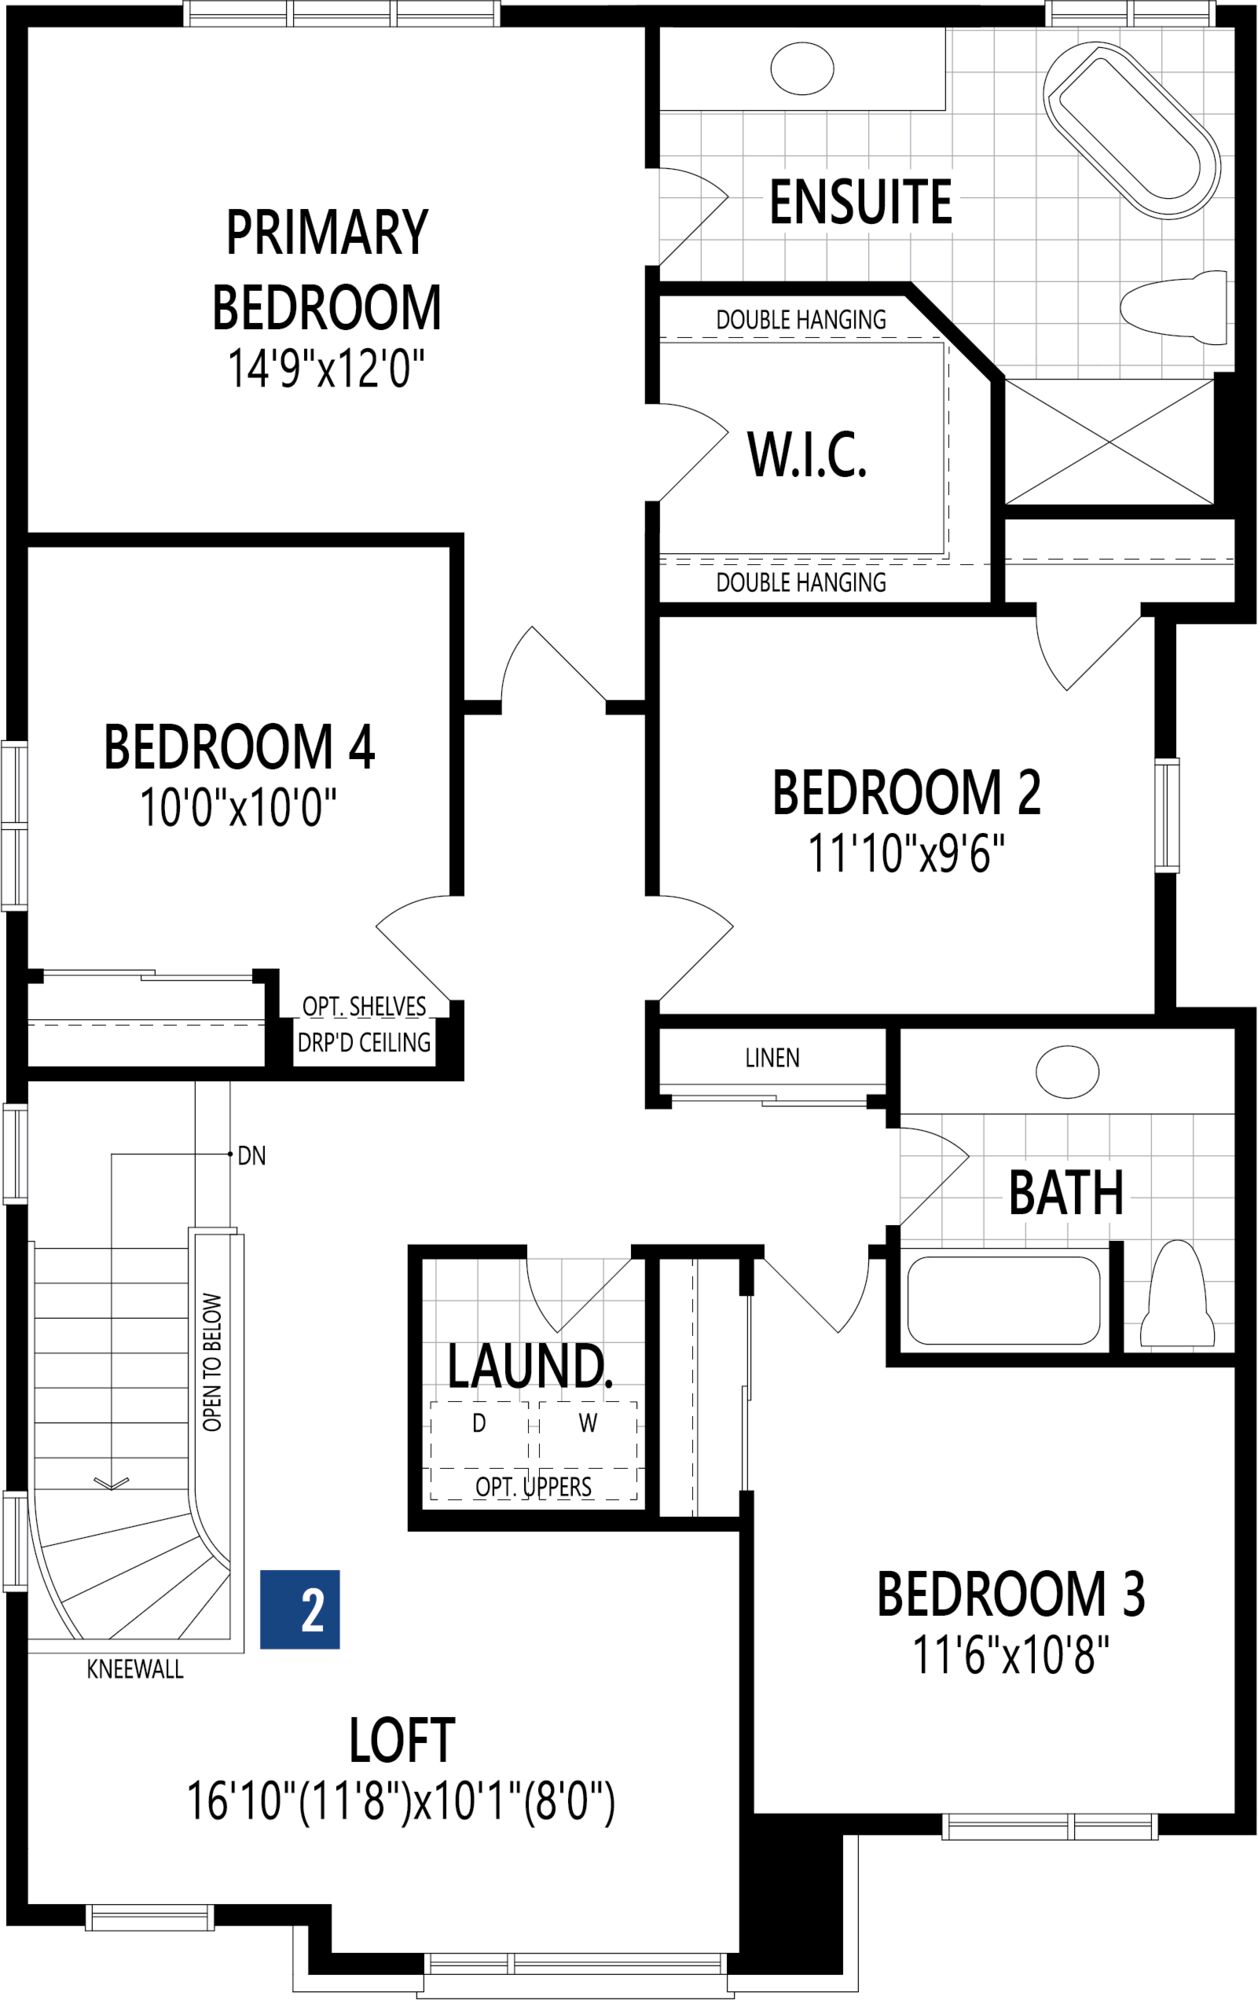 Valleyfield Floor Plan of Half Moon Bay Towns with undefined beds